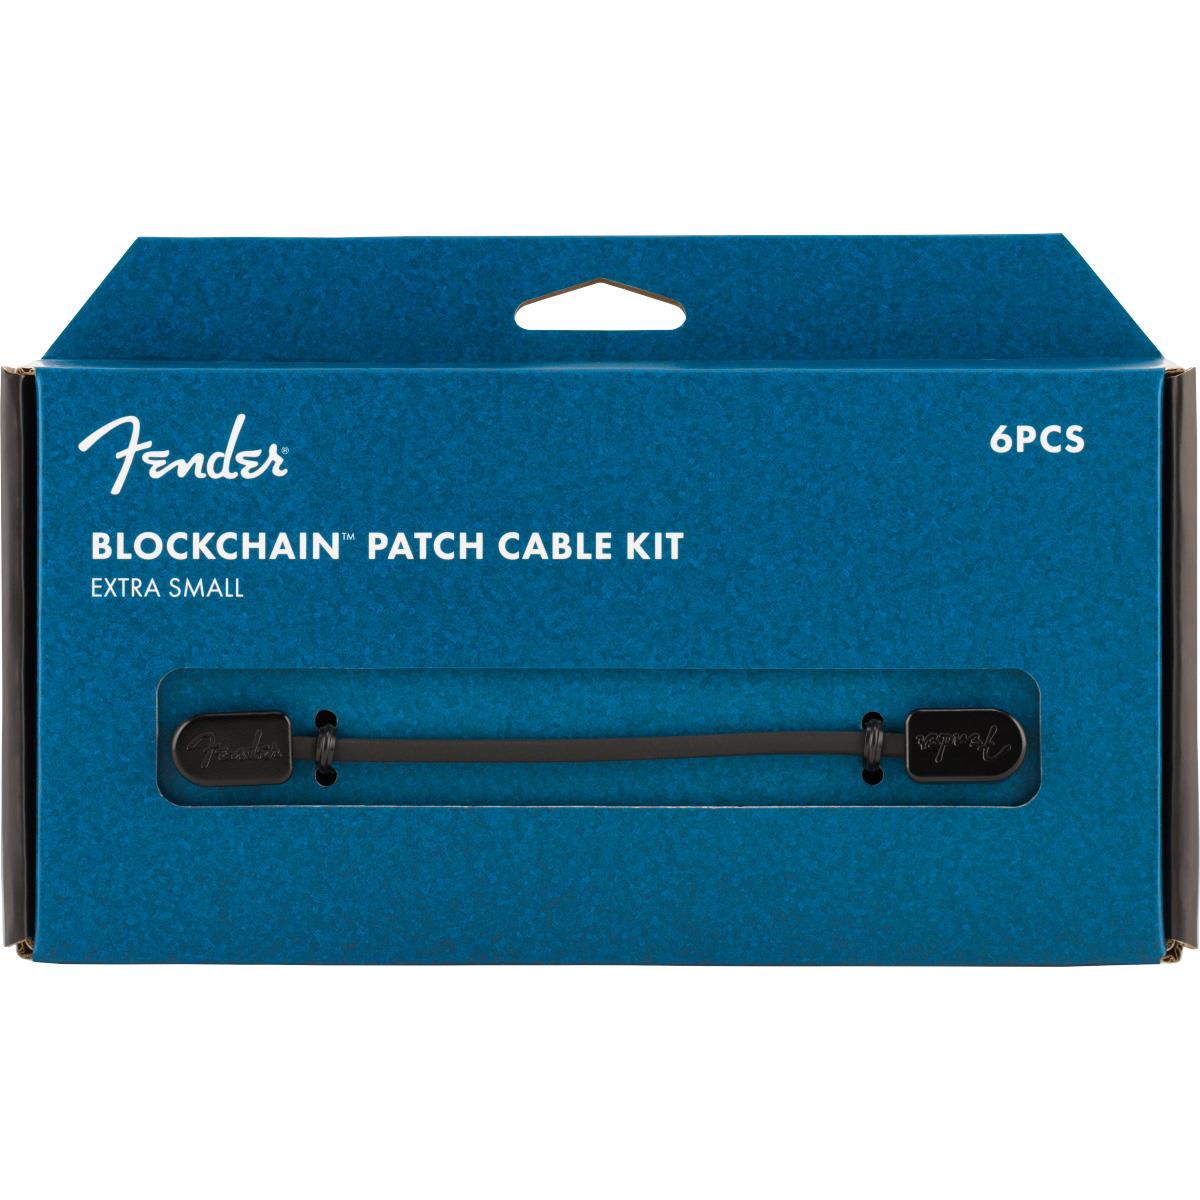 Image of Fender Squier Fender Blockchain Patch Cable Kit